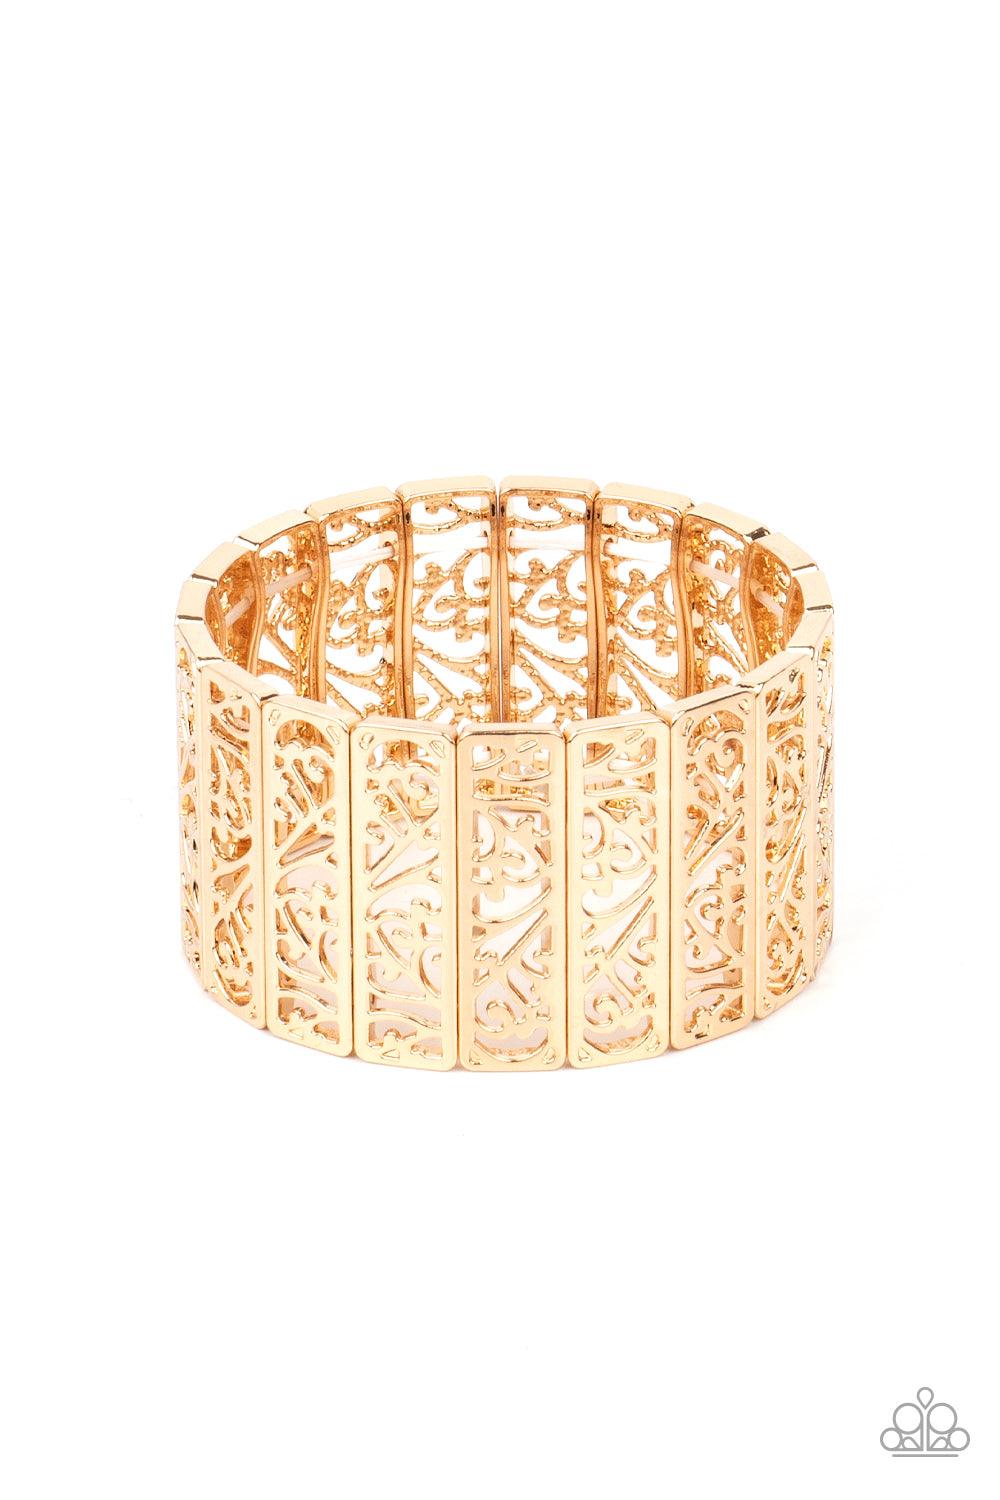 Paparazzi Accessories Ornate Orchards - Gold Filled with vine-like filigree centers, dainty gold rectangular frames are threaded along stretchy bands around the wrist for a seasonal inspired fashion. Sold as one individual bracelet. Jewelry